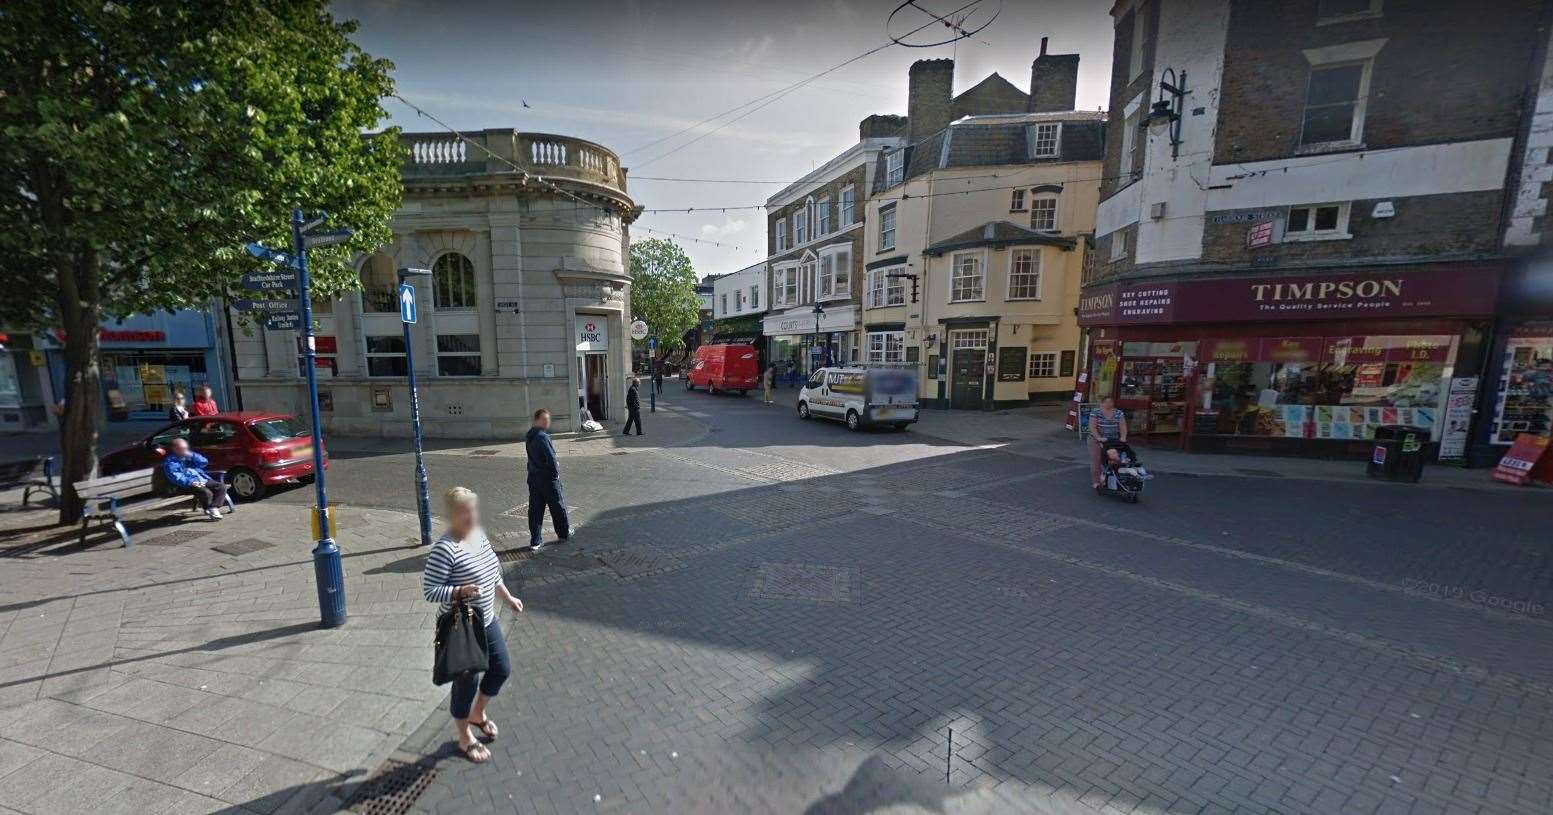 The incident happened in Queen Street, near the junction with King Street and High Street. Picture: Google